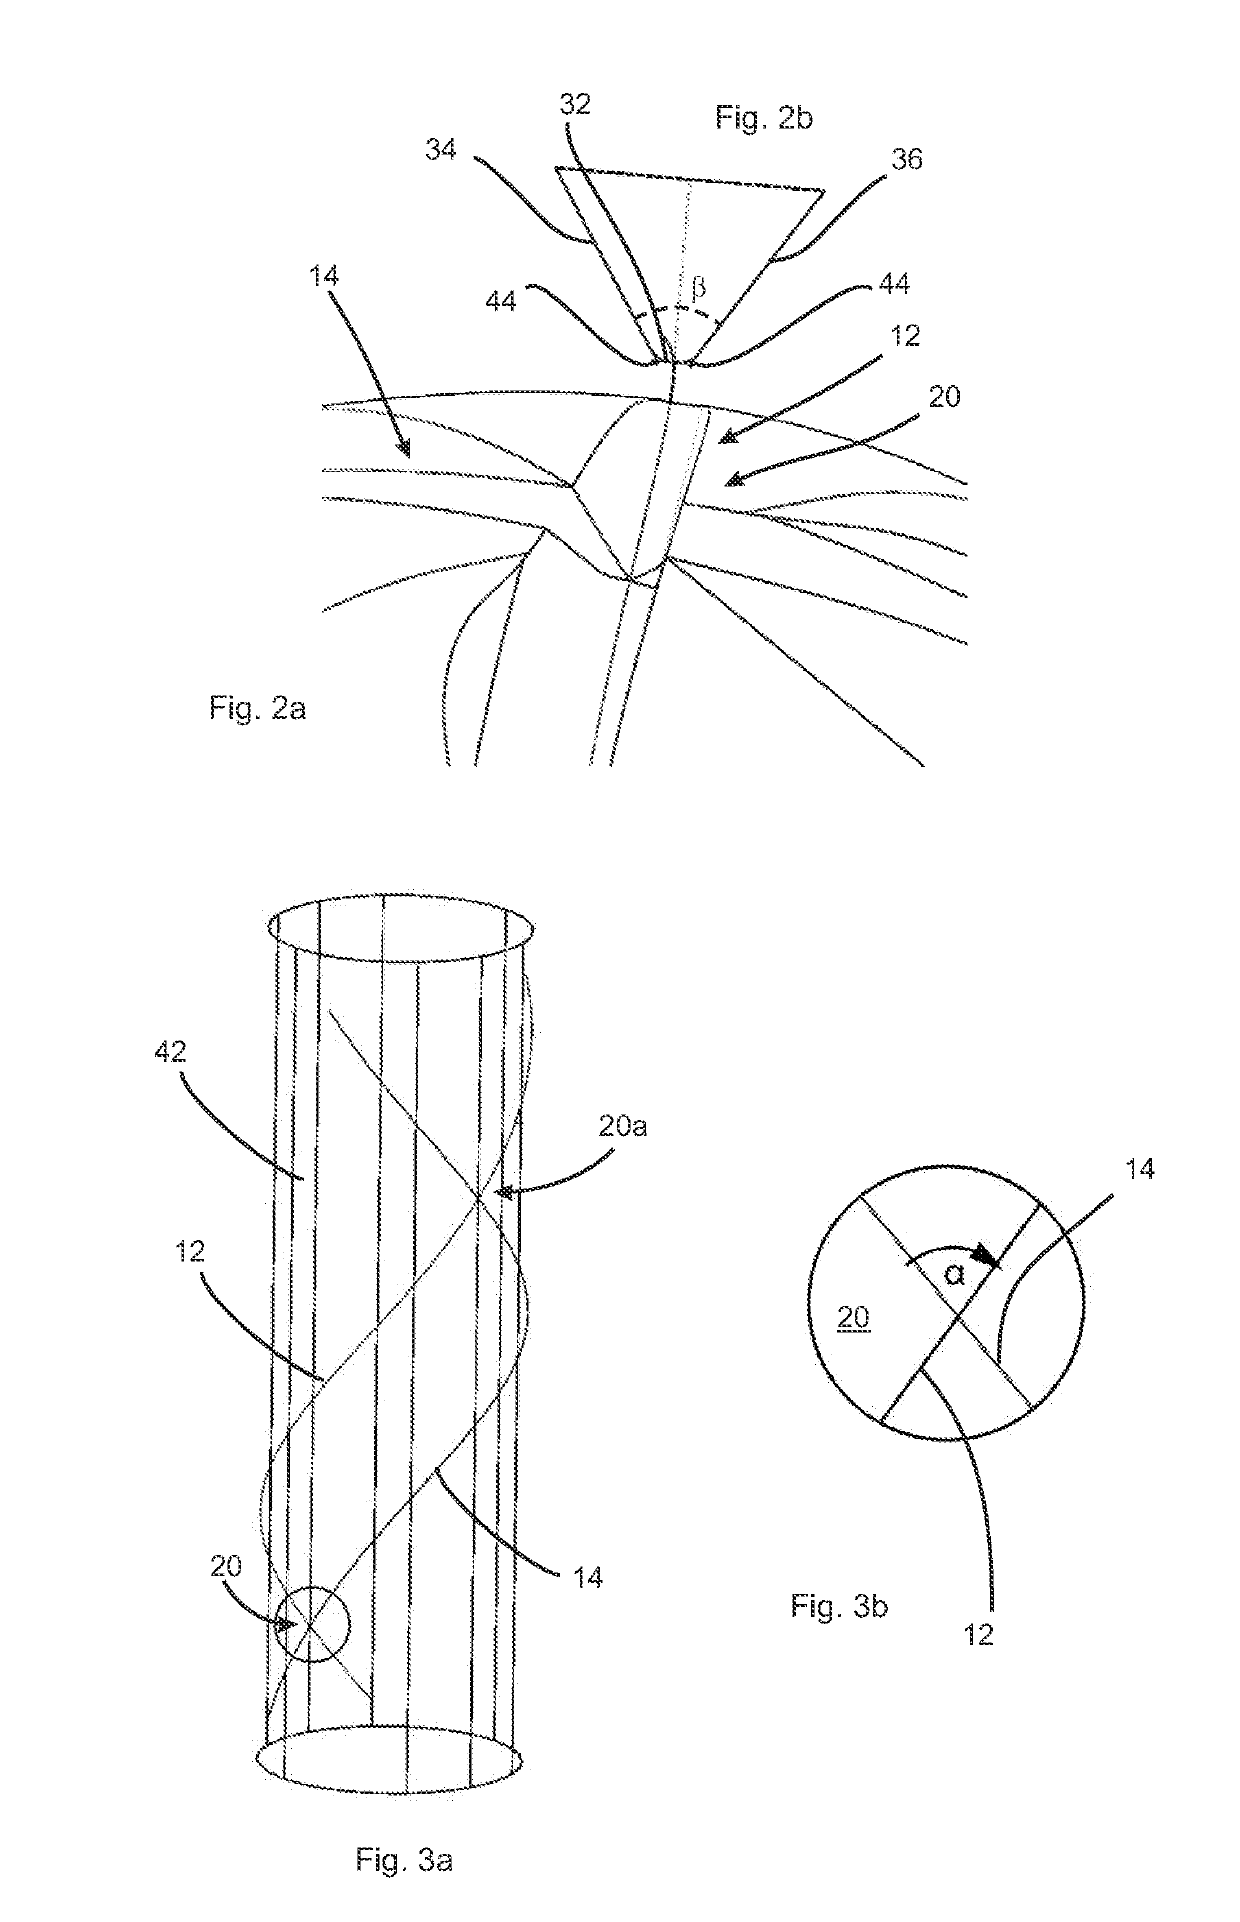 Plastics material bottle with intersecting tension bands